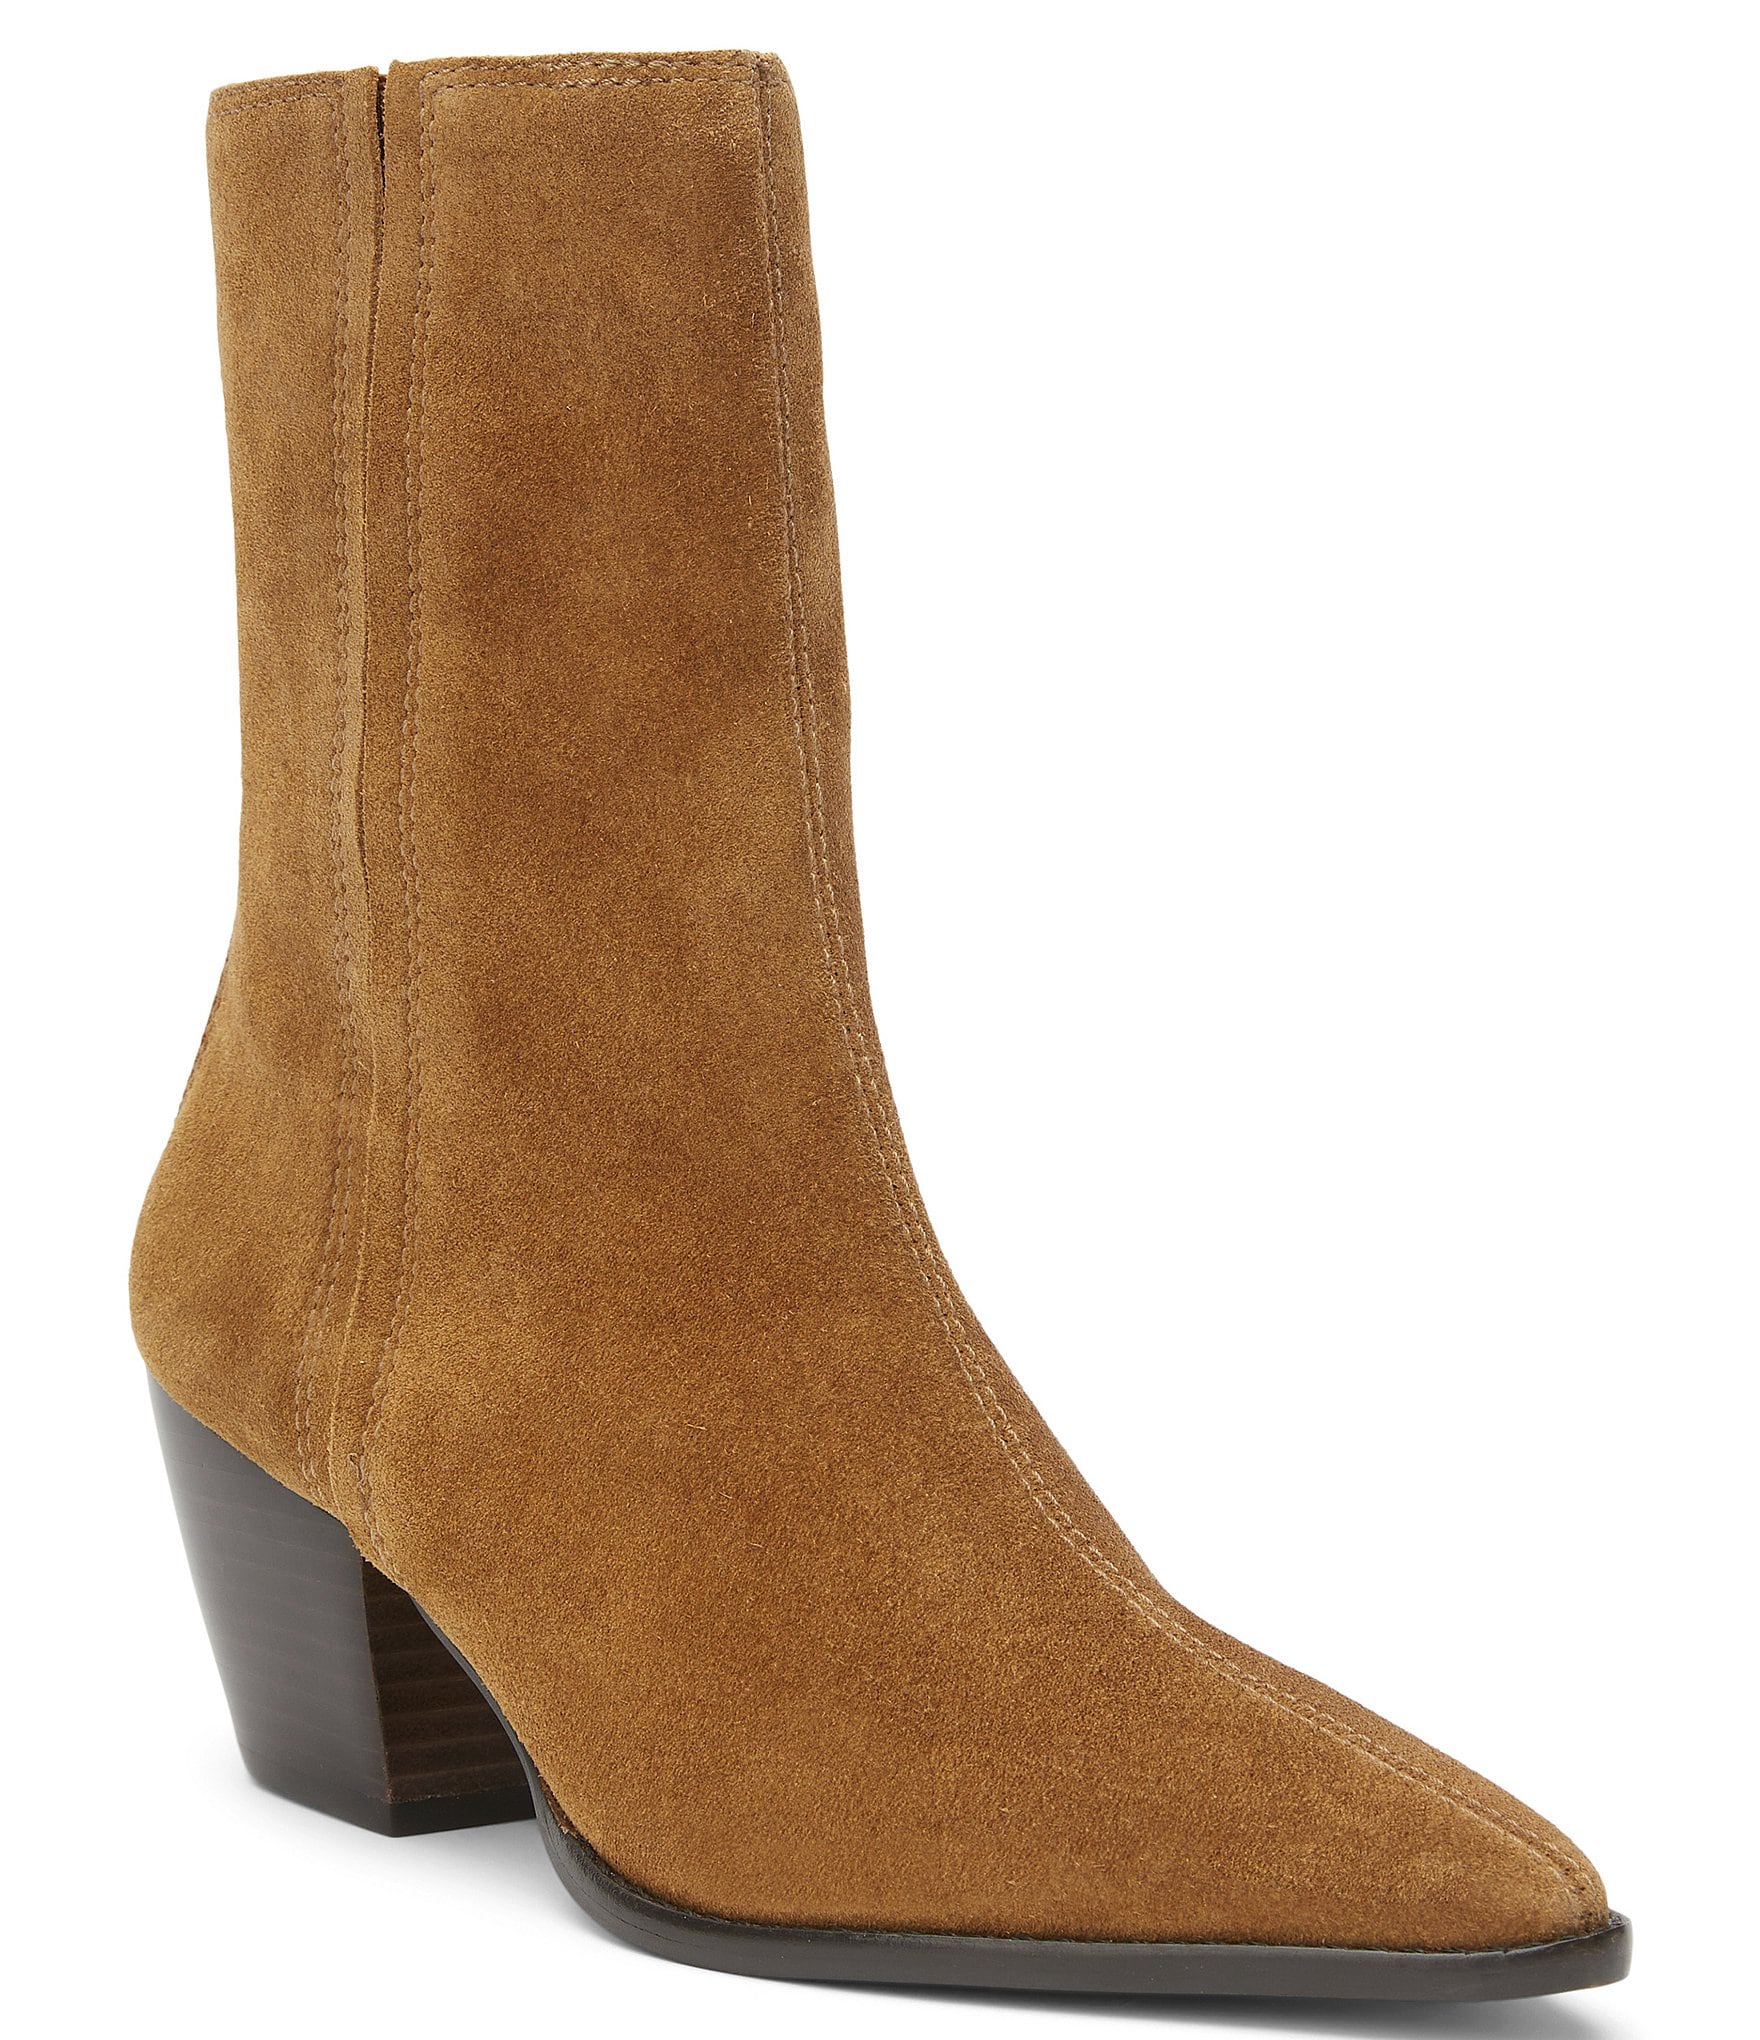 Lulus x Matisse | Brown Spirit Fawn Suede Pointed Toe Ankle Booties | Womens | 7.5 (Available in 8.5, 8, 7, 6.5, 6, 9, 11) | Lulus Exclusive | Boots